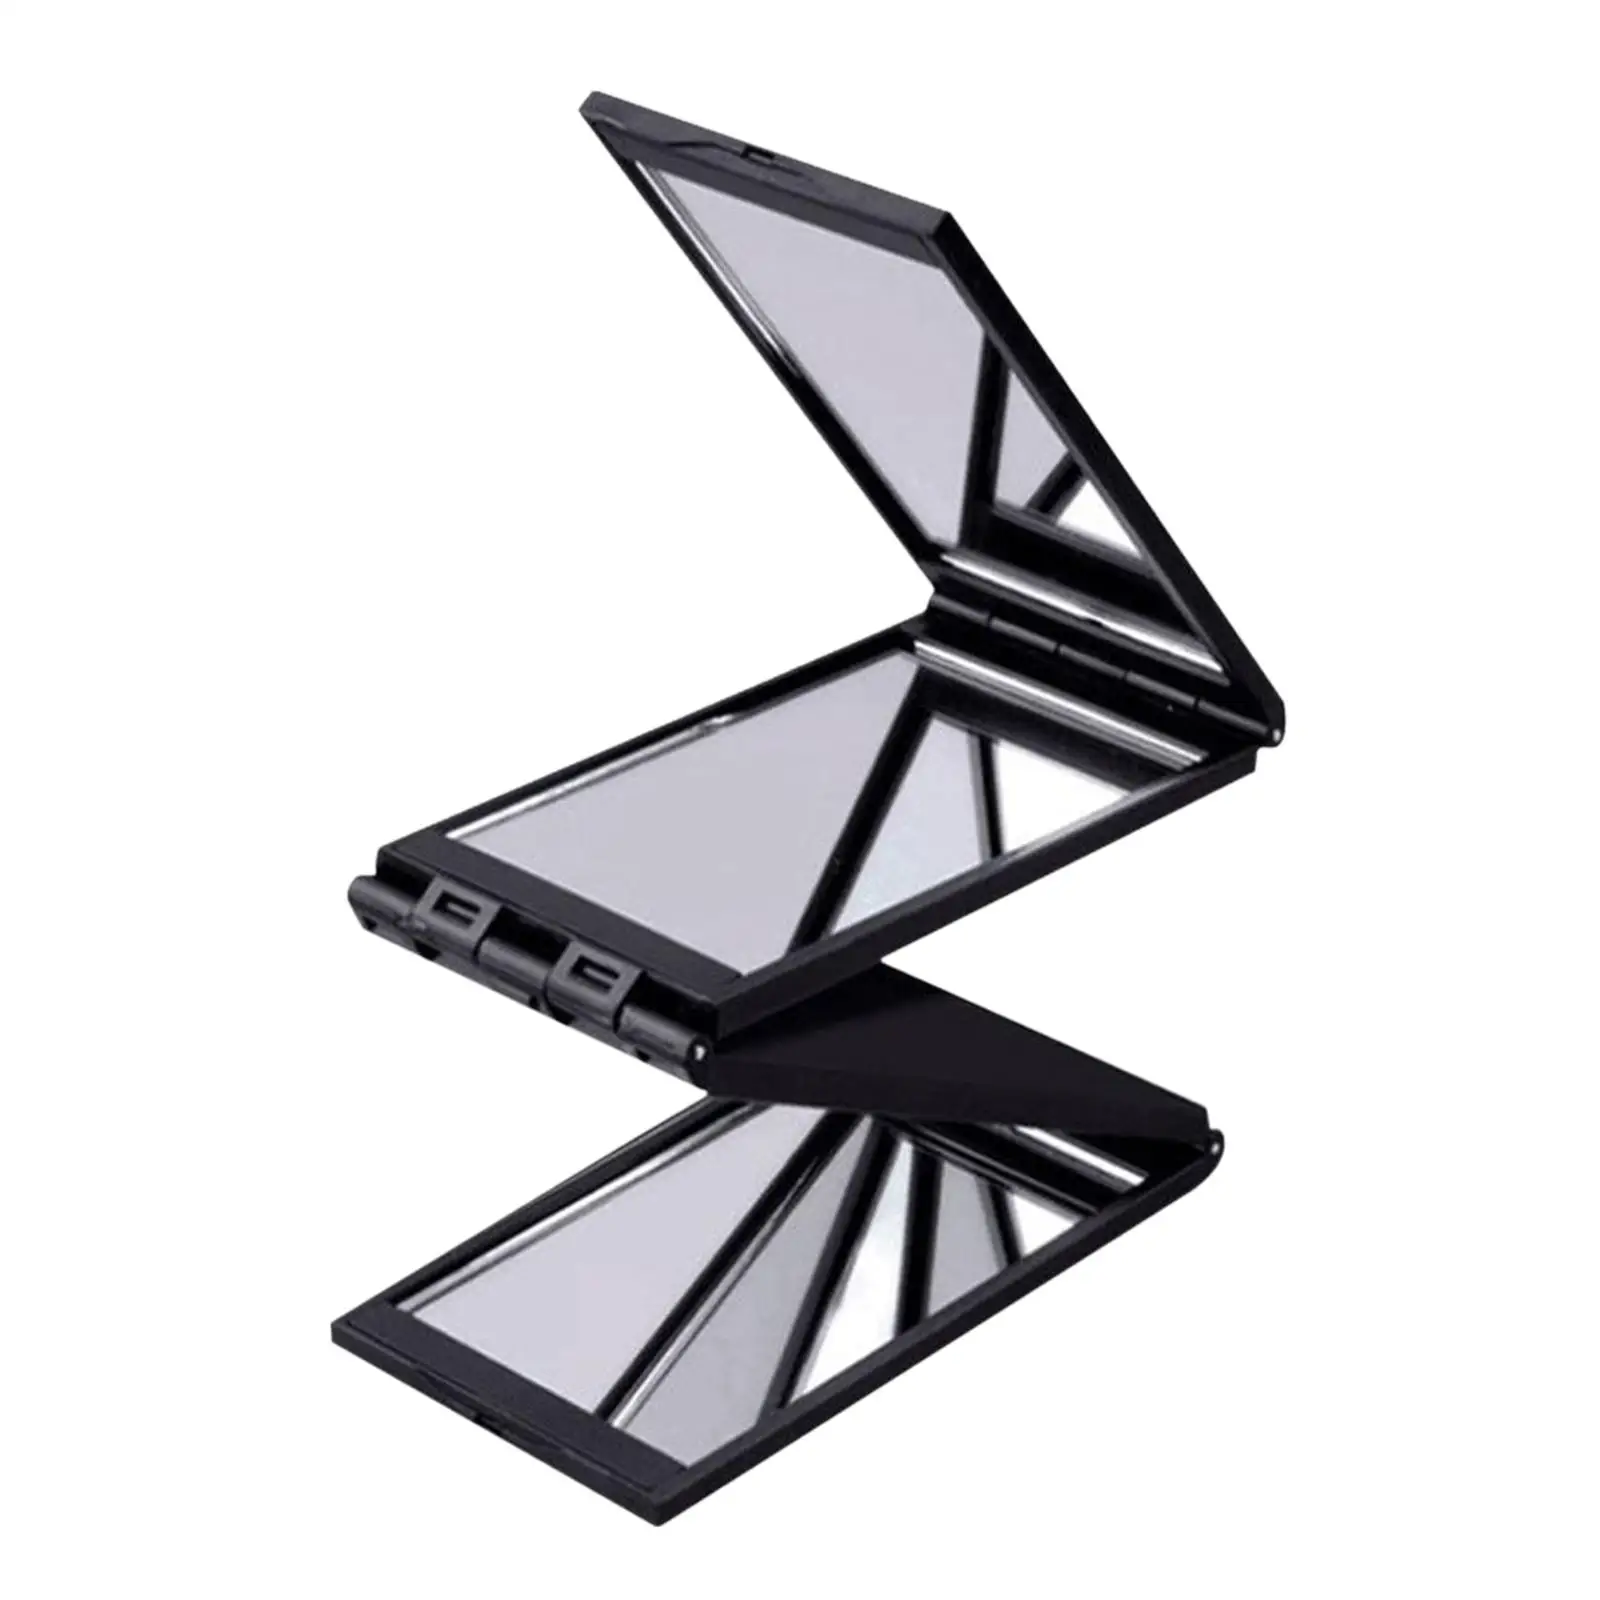 4 Sides Foldable Makeup Mirror Lady Adjustable Compact Mirror Cosmetic Vanity Mirror for Shaving Skincare Home Hair Styling SPA